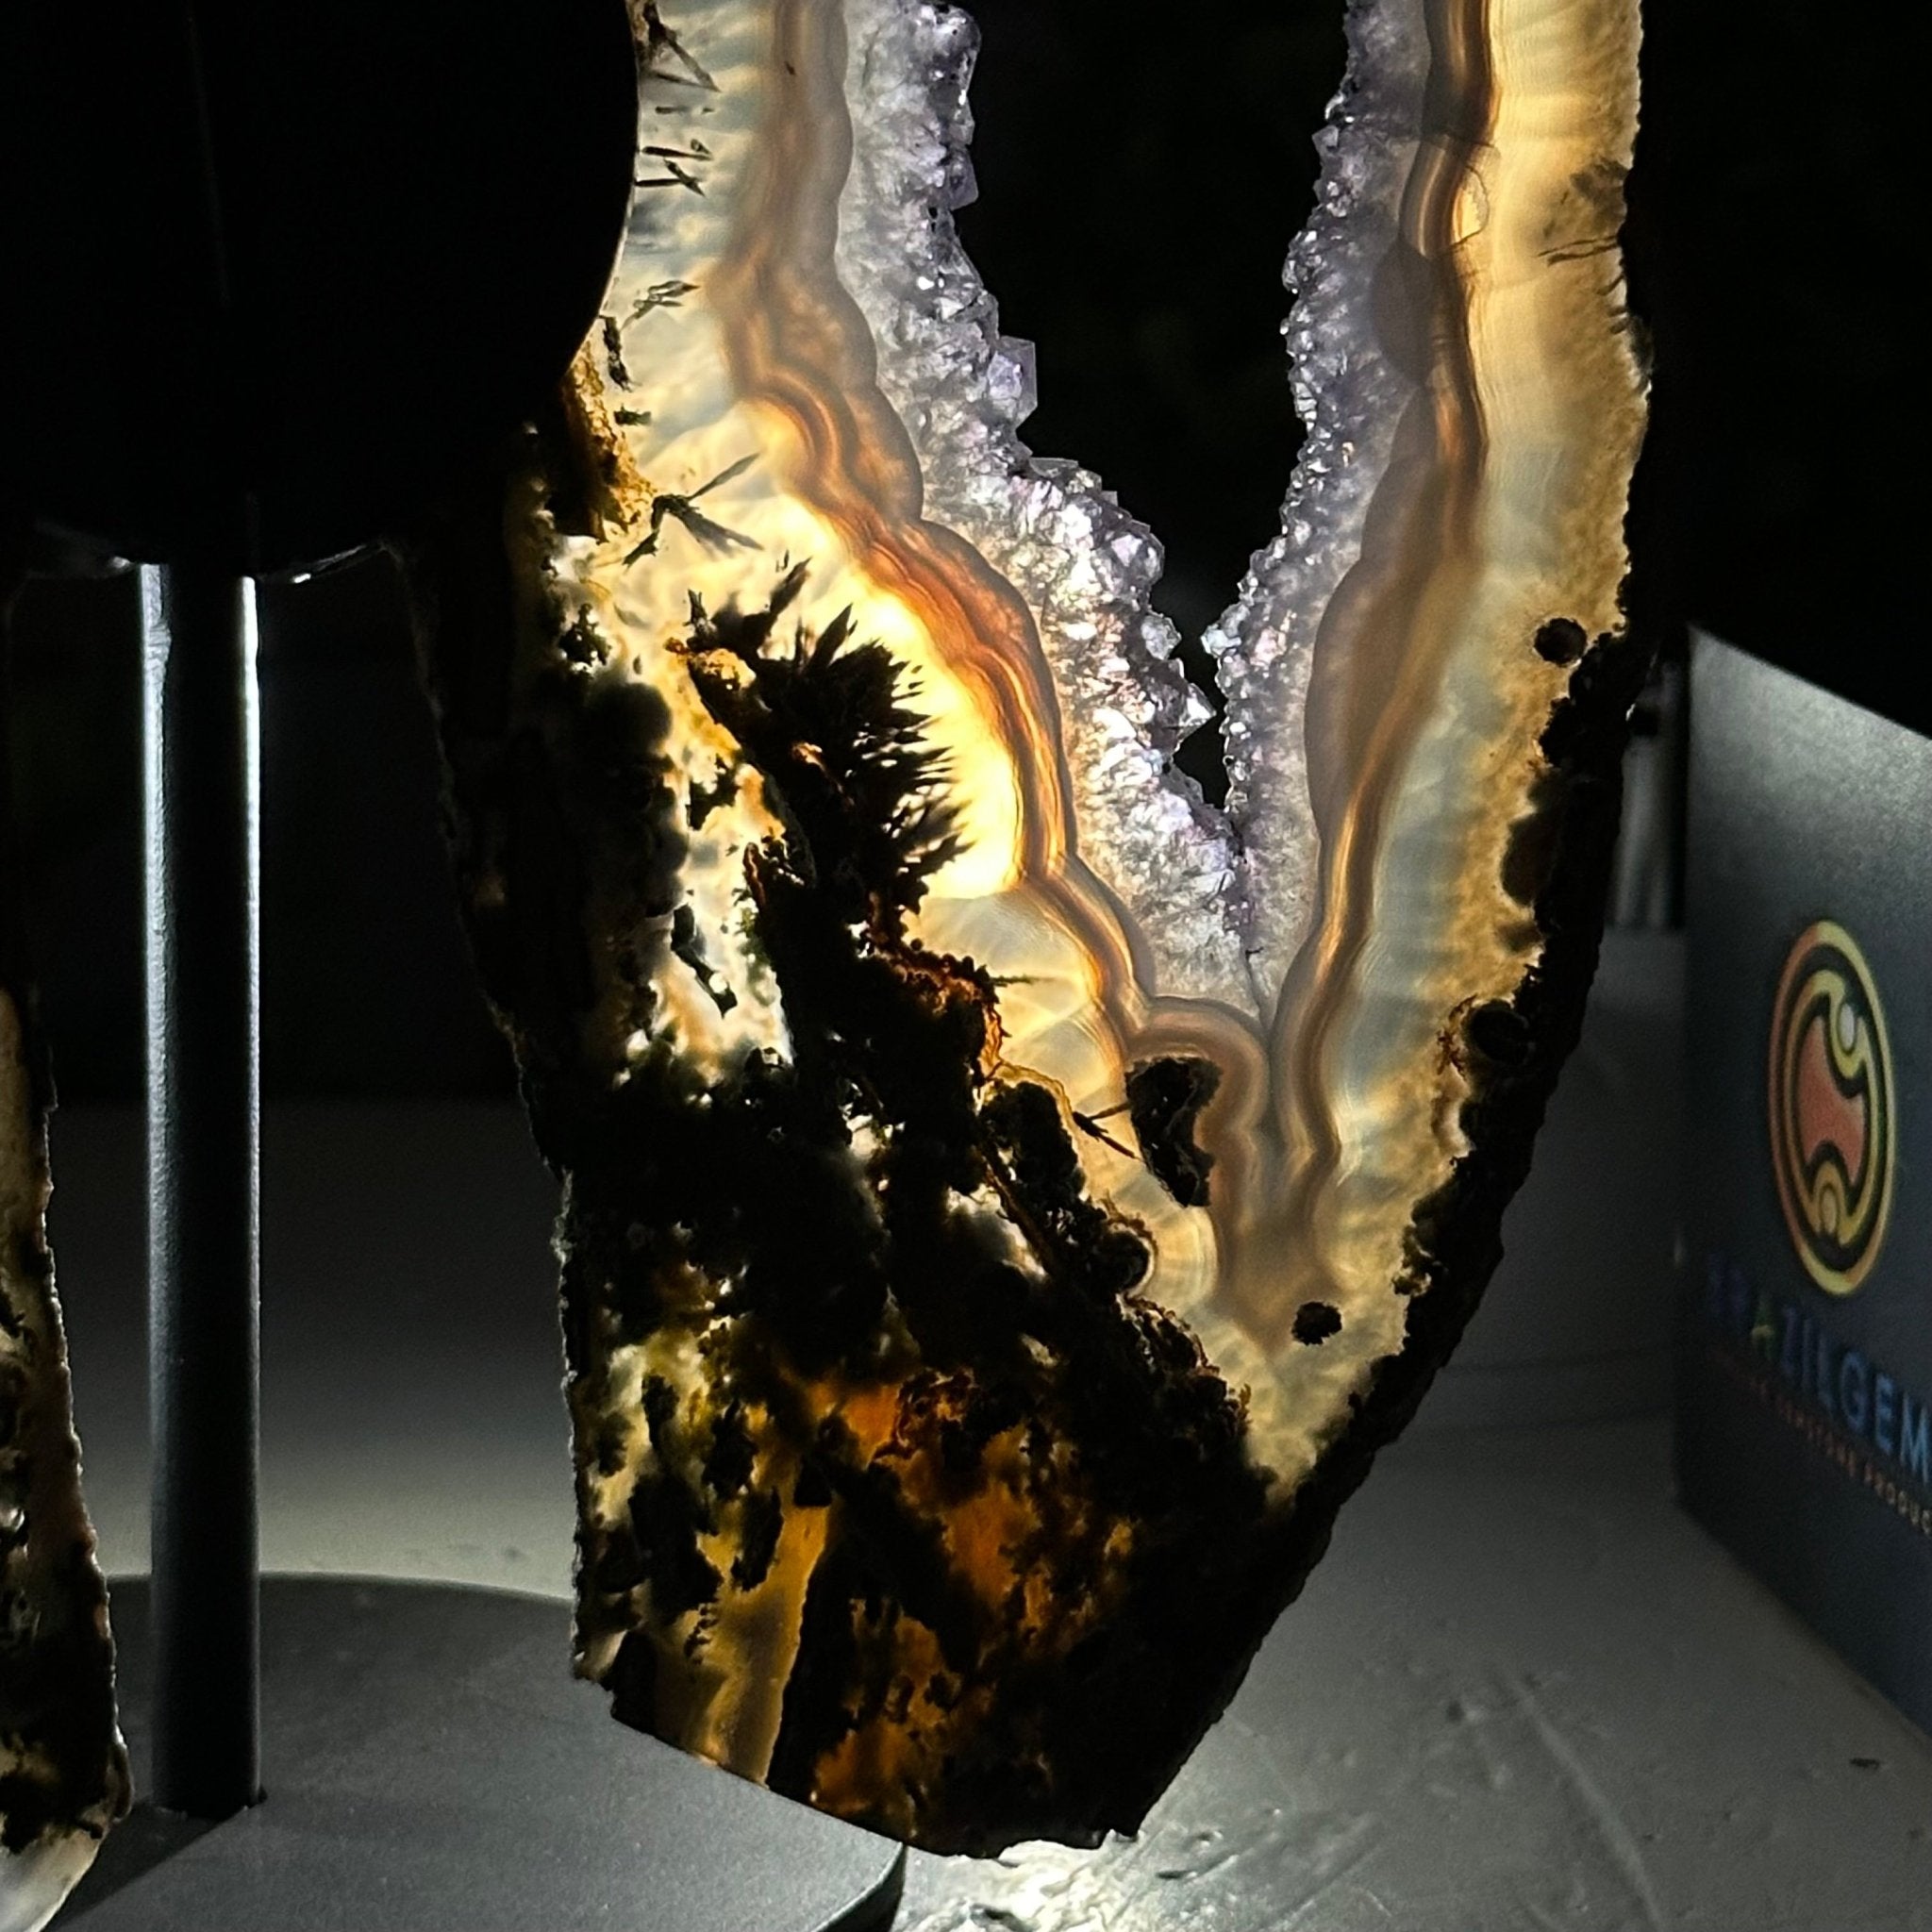 Natural Brazilian Agate "Butterfly Wings", 8.8" Tall #5050NA-104 - Brazil GemsBrazil GemsNatural Brazilian Agate "Butterfly Wings", 8.8" Tall #5050NA-104Agate Butterfly Wings5050NA-104